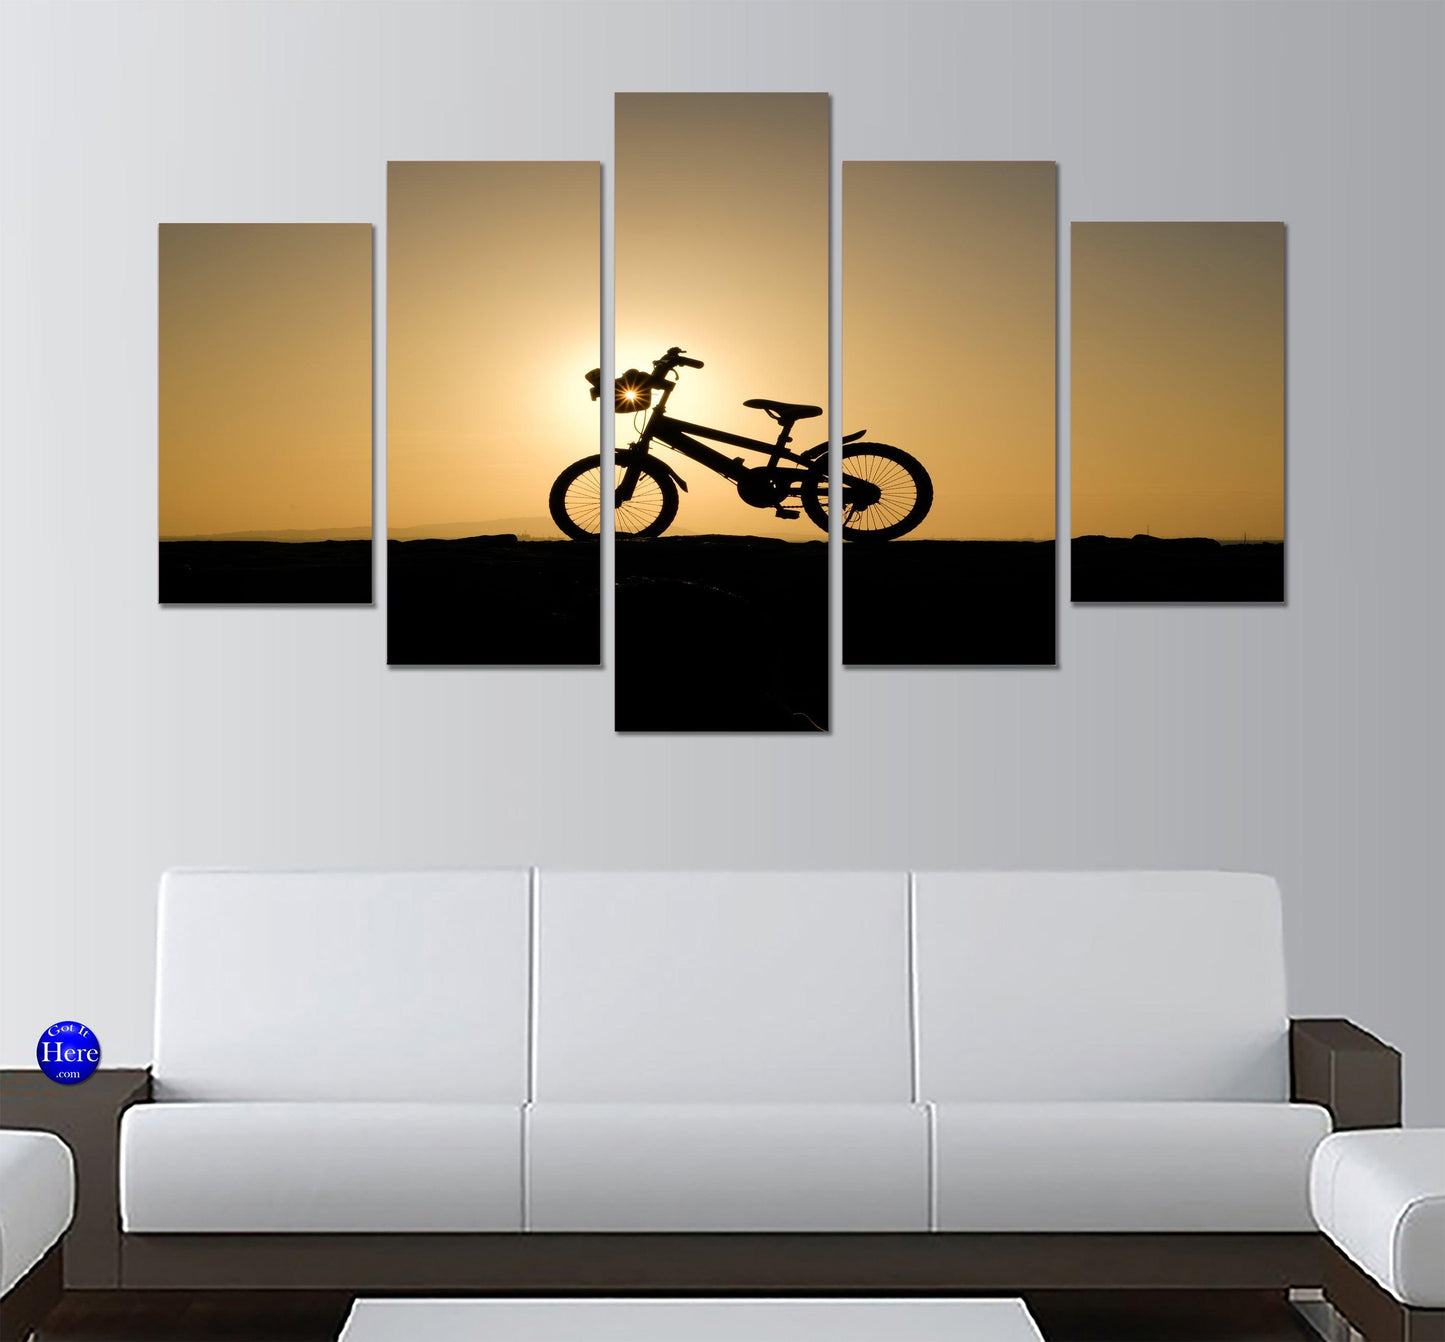 Bicycle At Sunset 5 Panel Canvas Print Wall Art - GotItHere.com